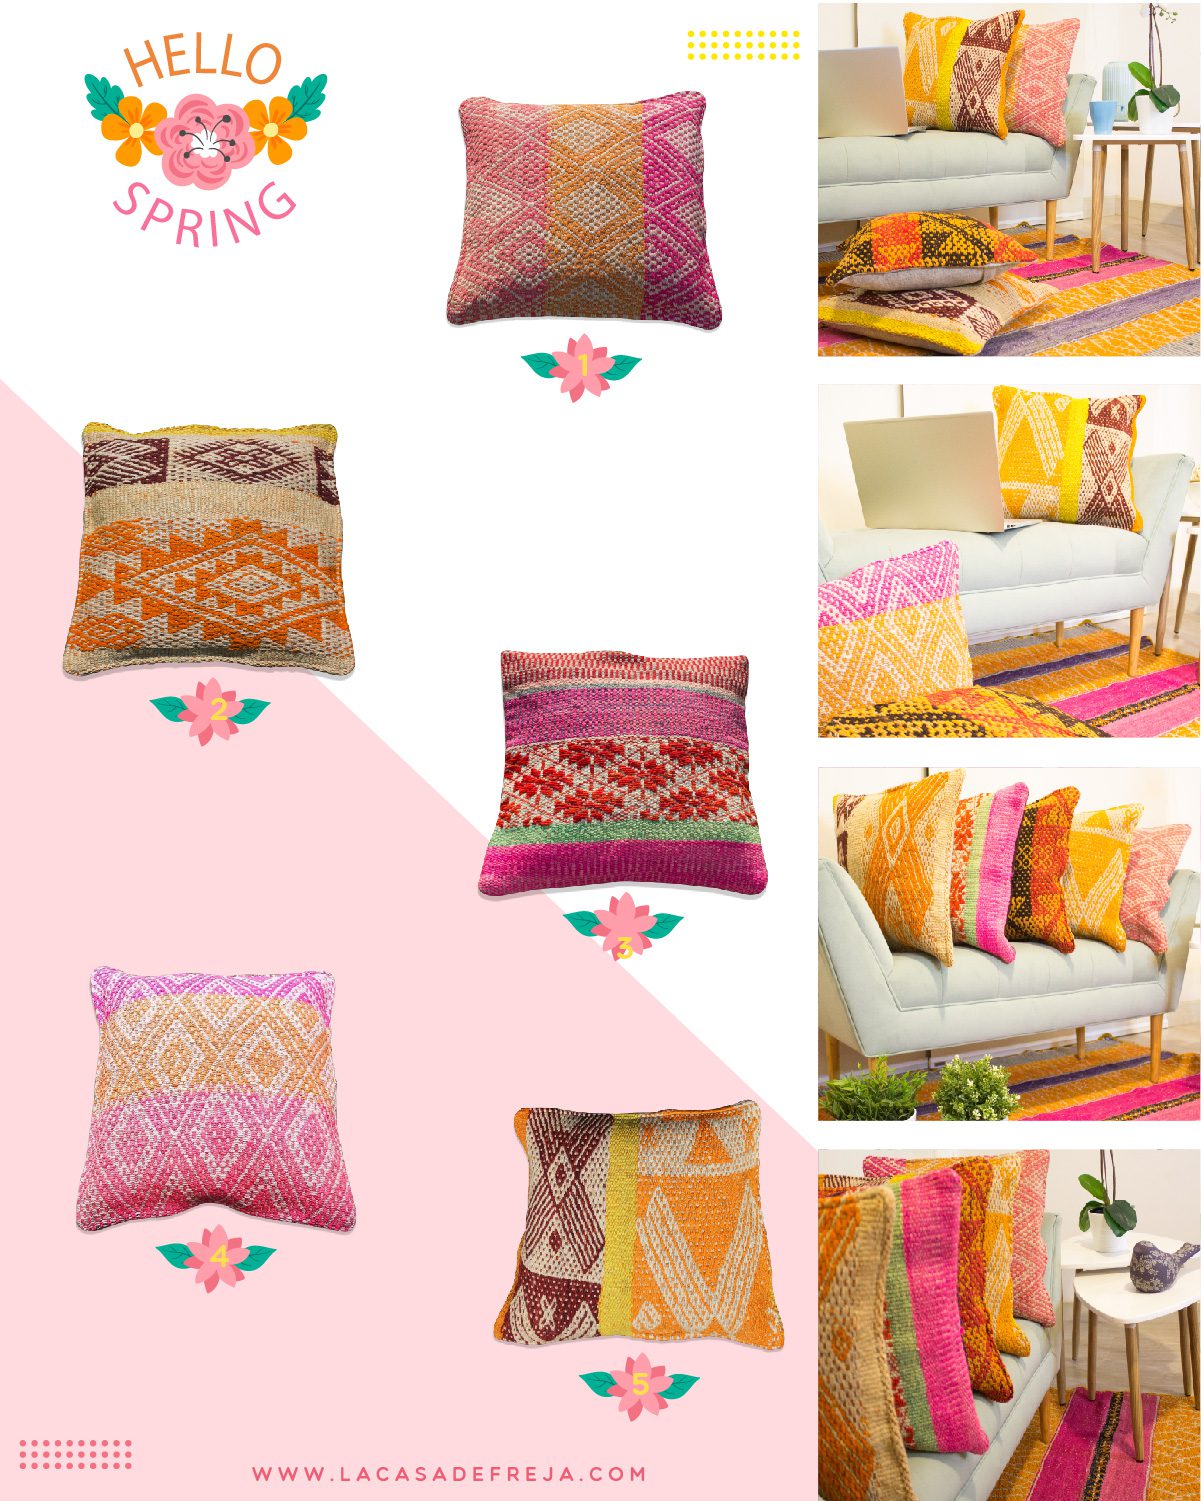 Welcoming spring with this selection of cushions